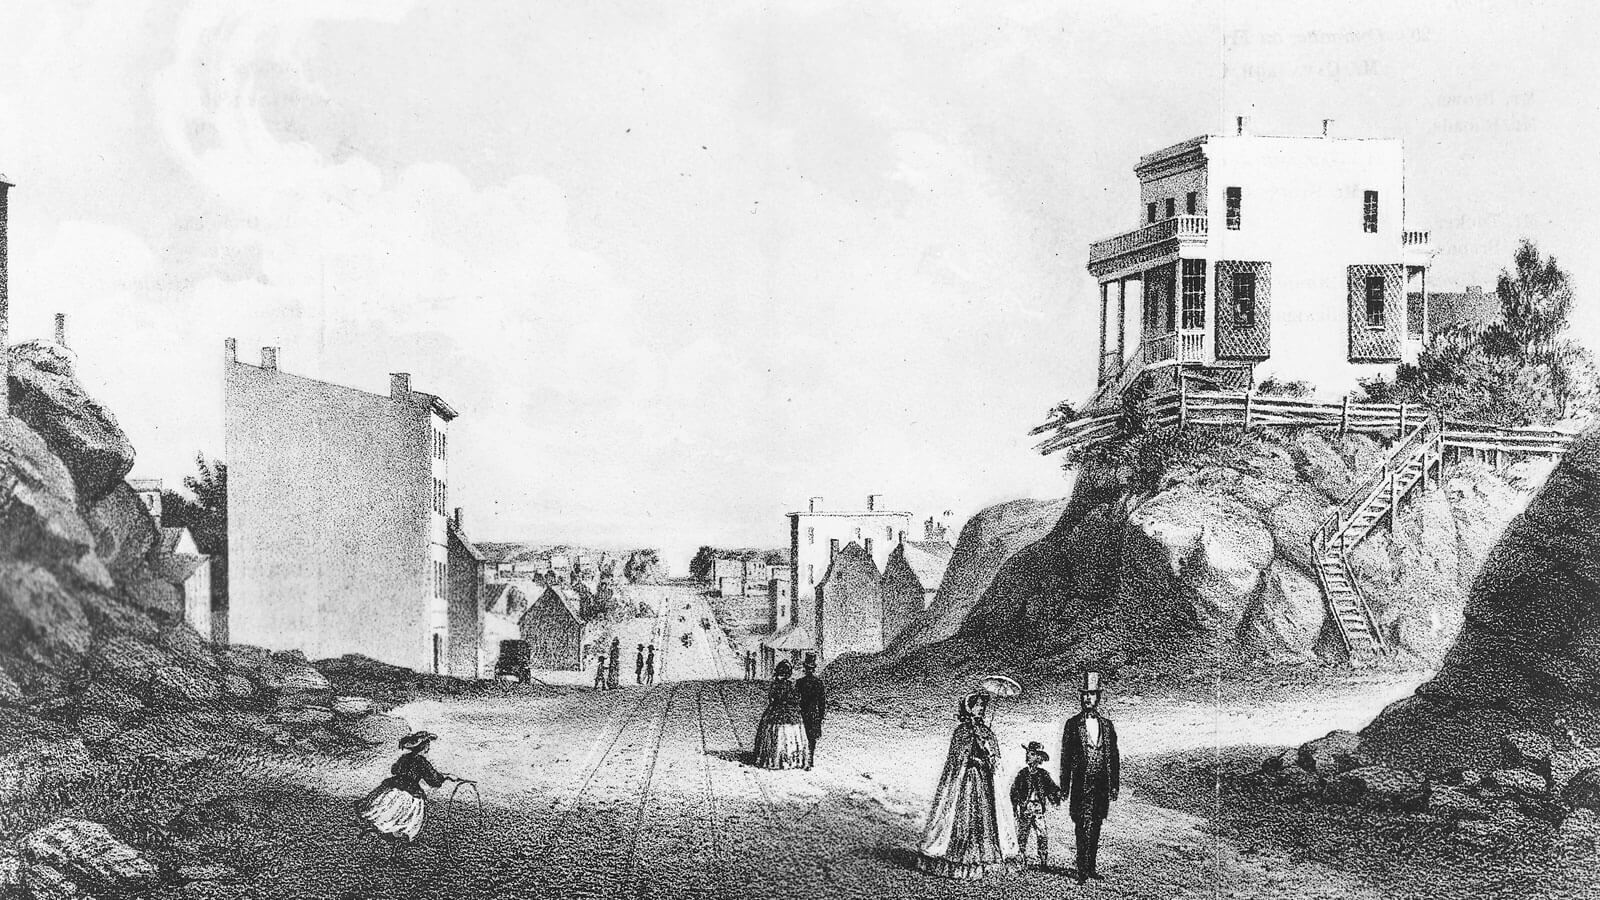 Site of the Pfizer World Headquarters Building as it Appeared in 1861